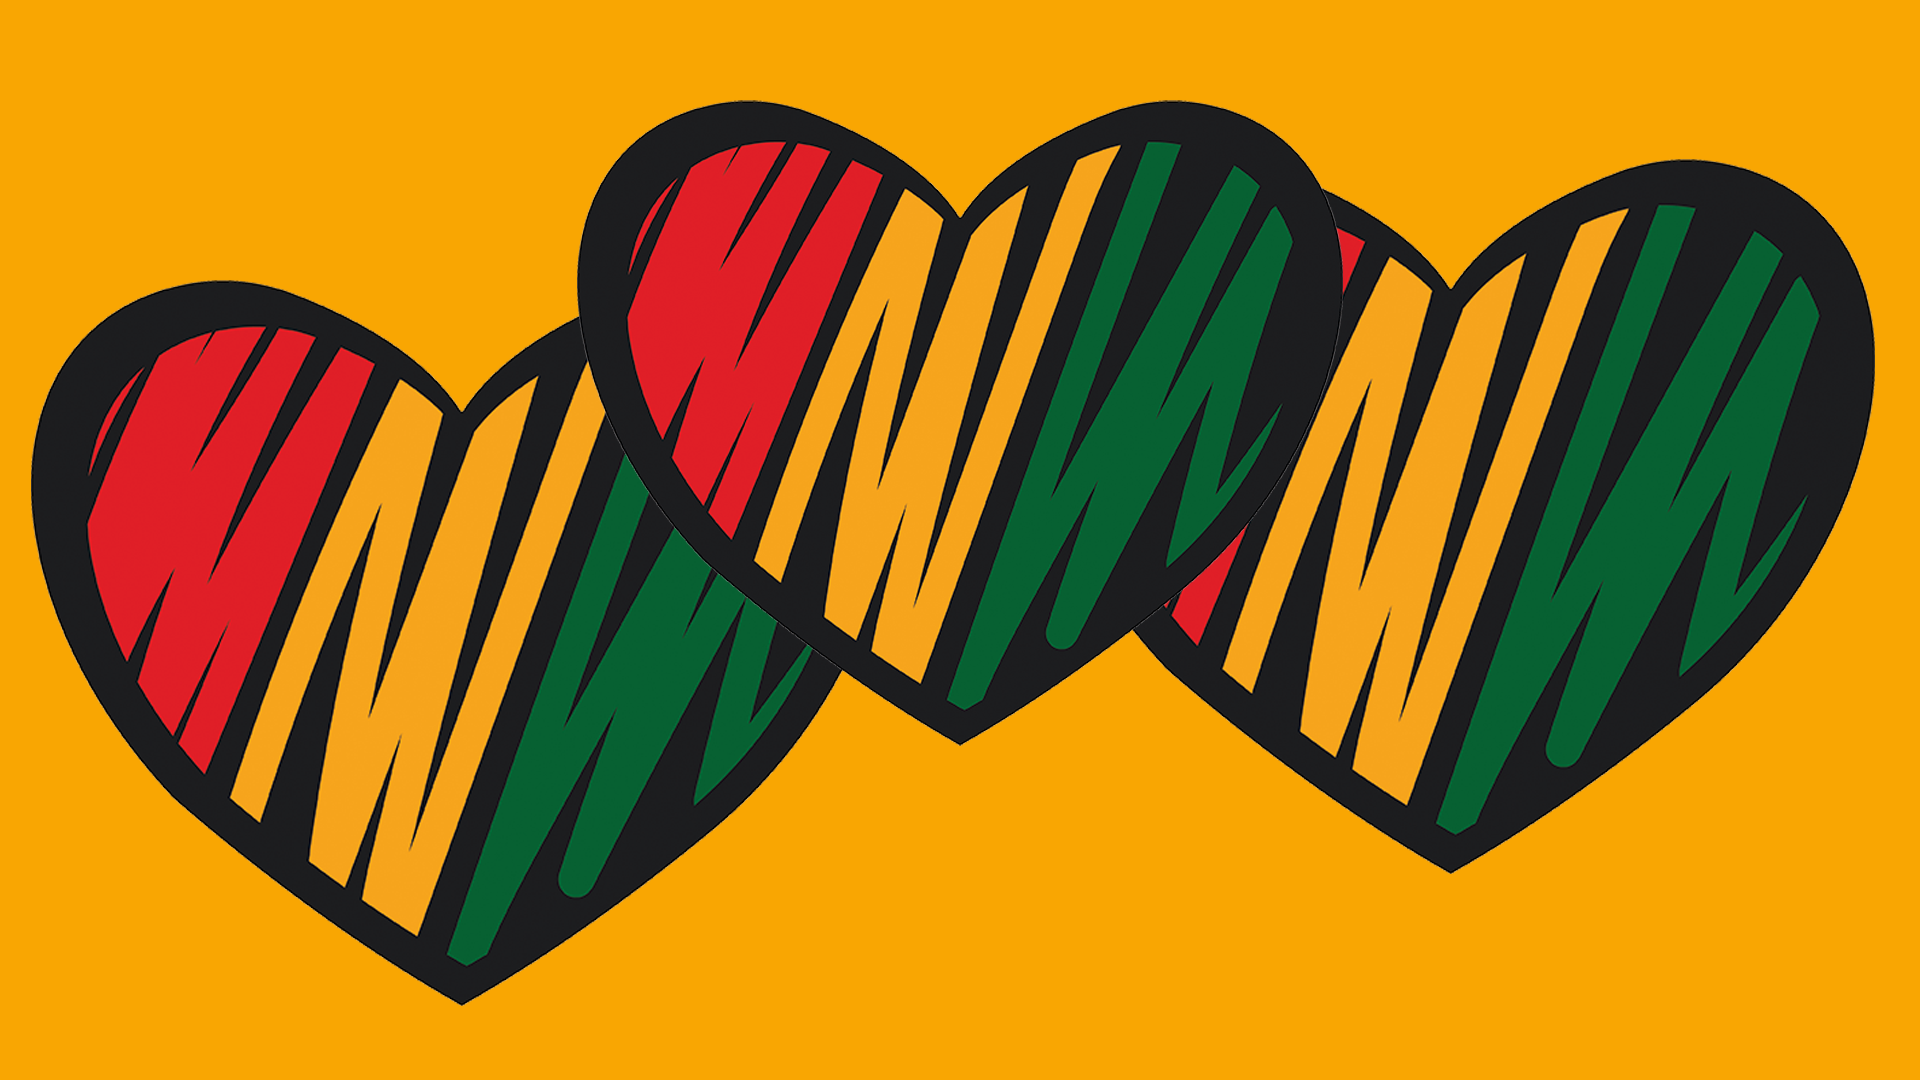 Doodle heart with African Union flag colors